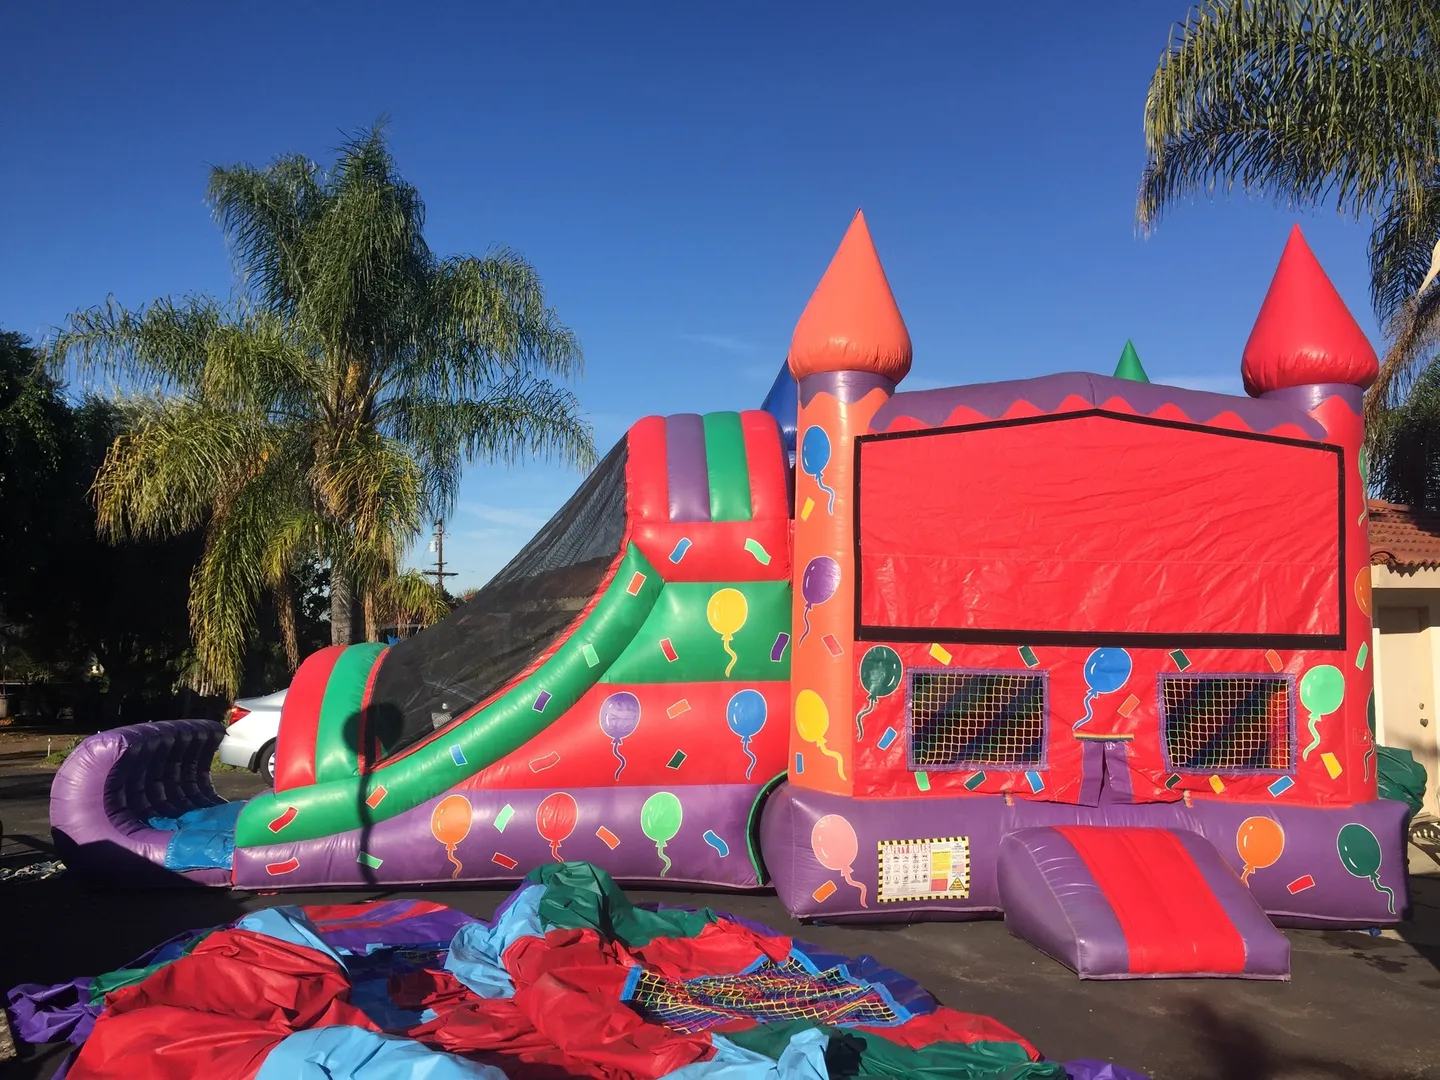 A large inflatable slide in the middle of a yard.